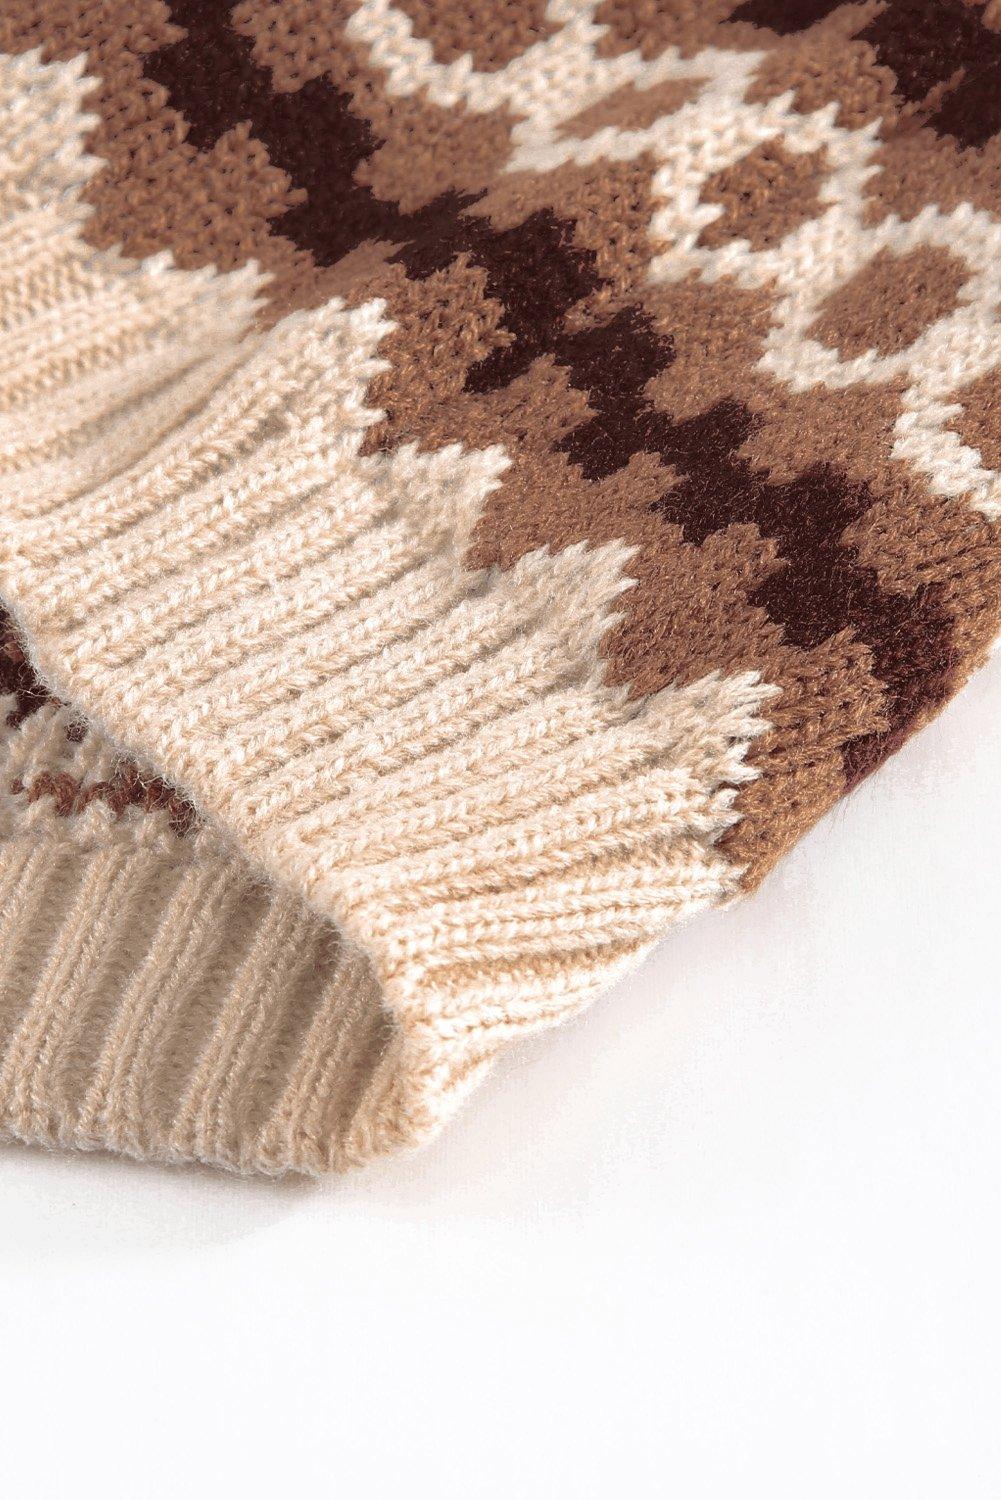 Brown Printed Crew Neck Knit Sweater